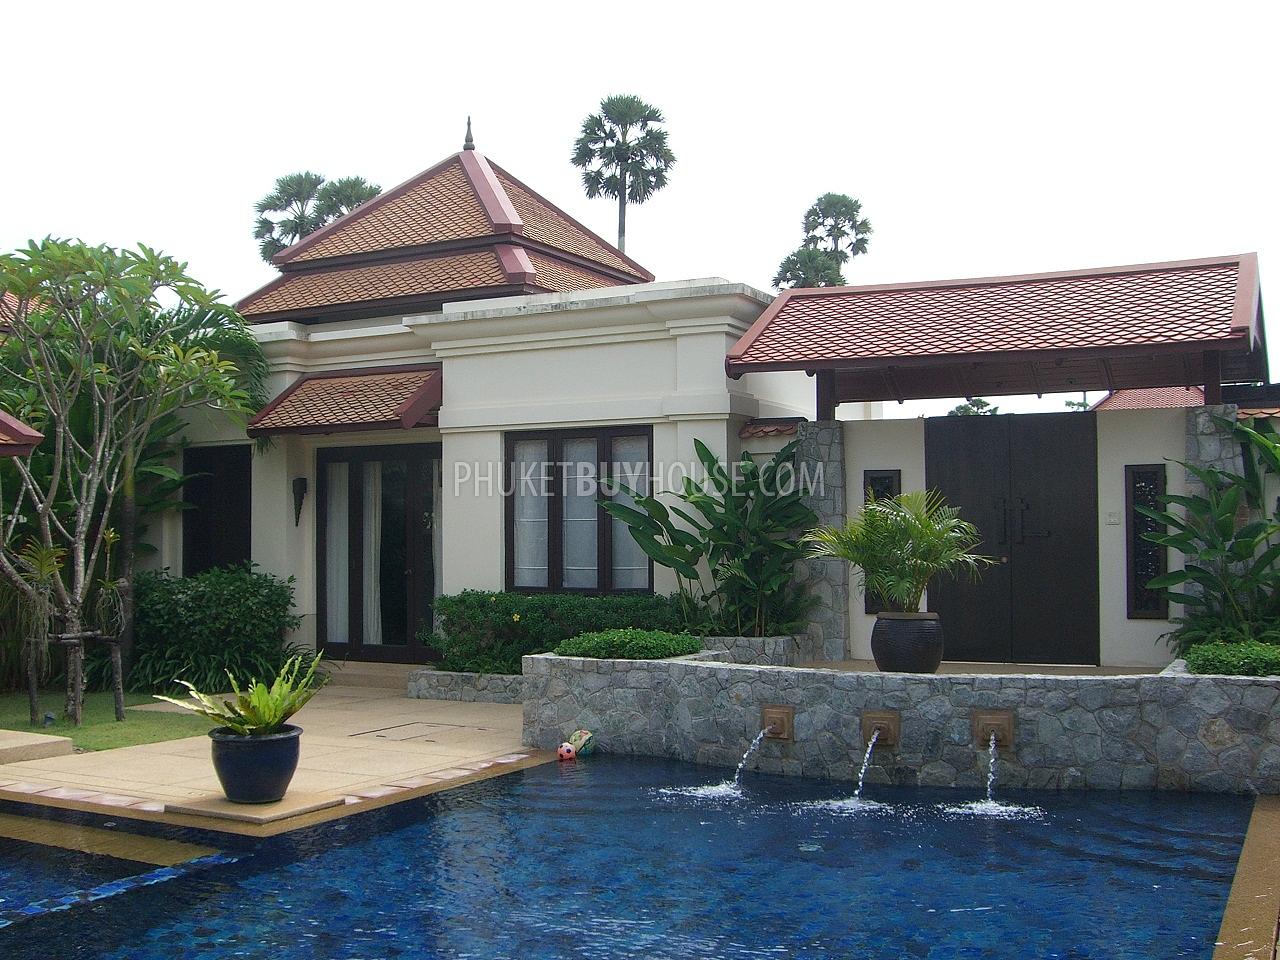 BAN1211: Villa with overlooks the Pool and exquisite Thai garden. Фото #10